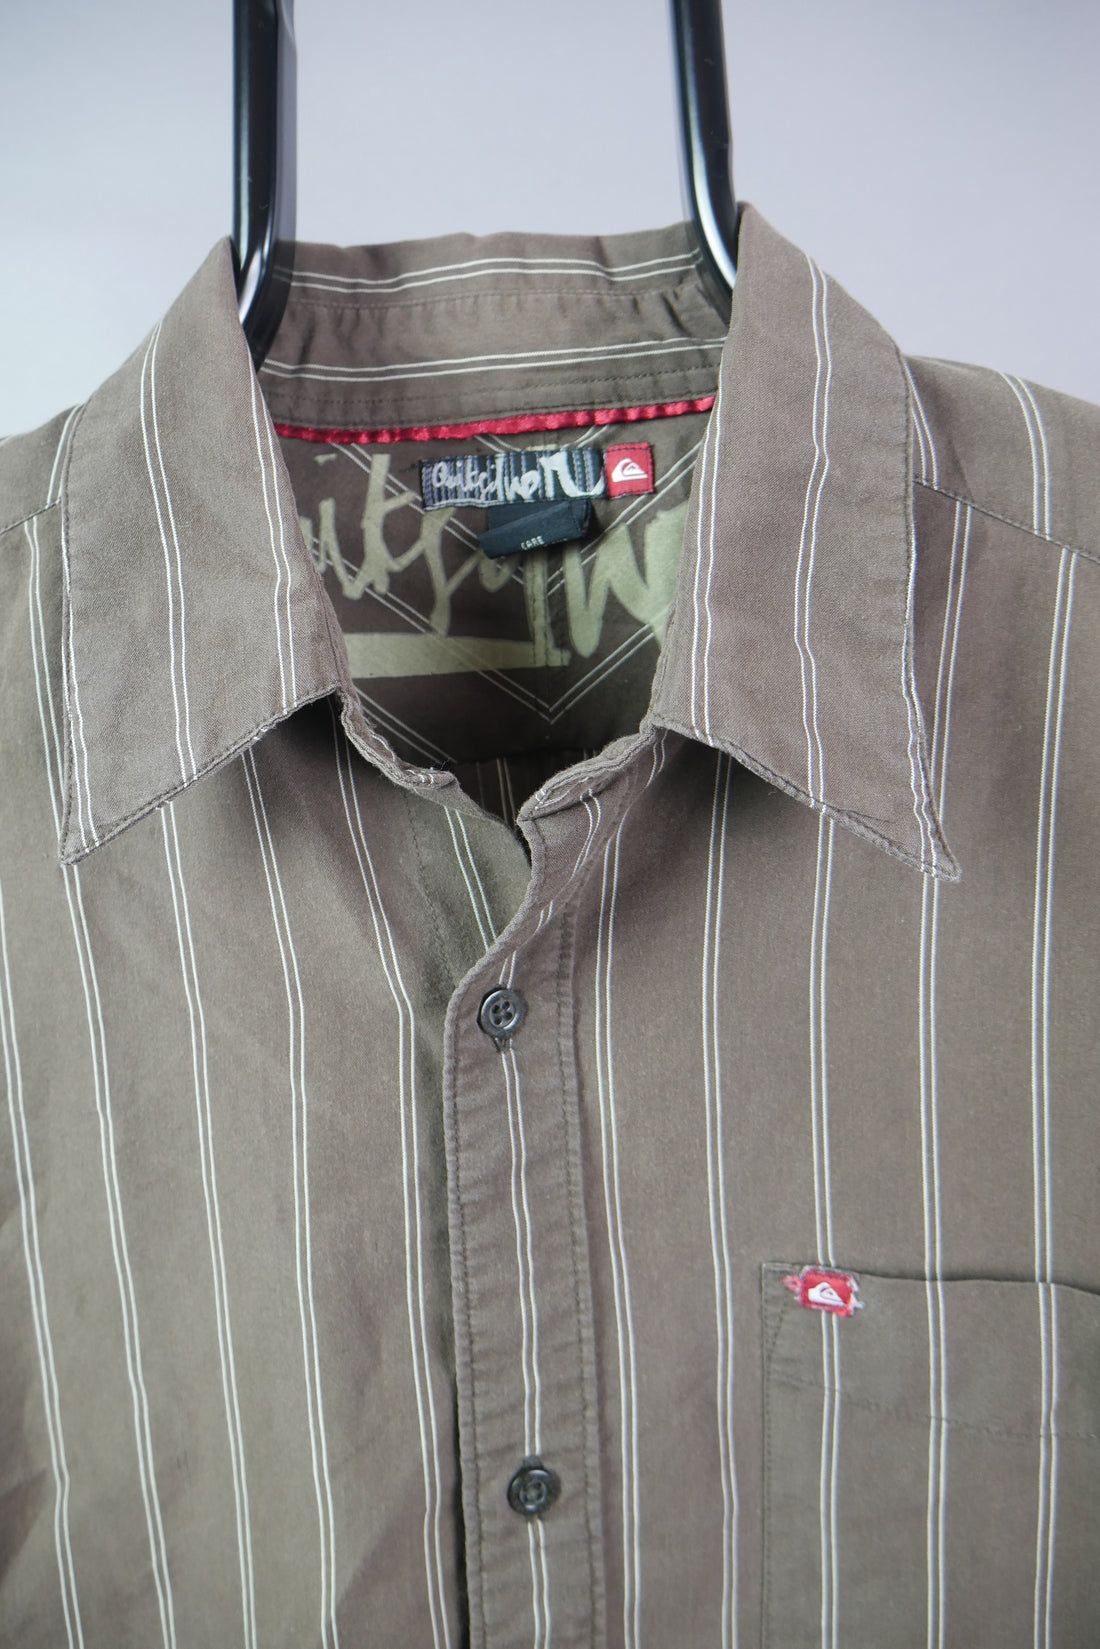 The Quiksilver Striped Long Sleeve Shirt (L)